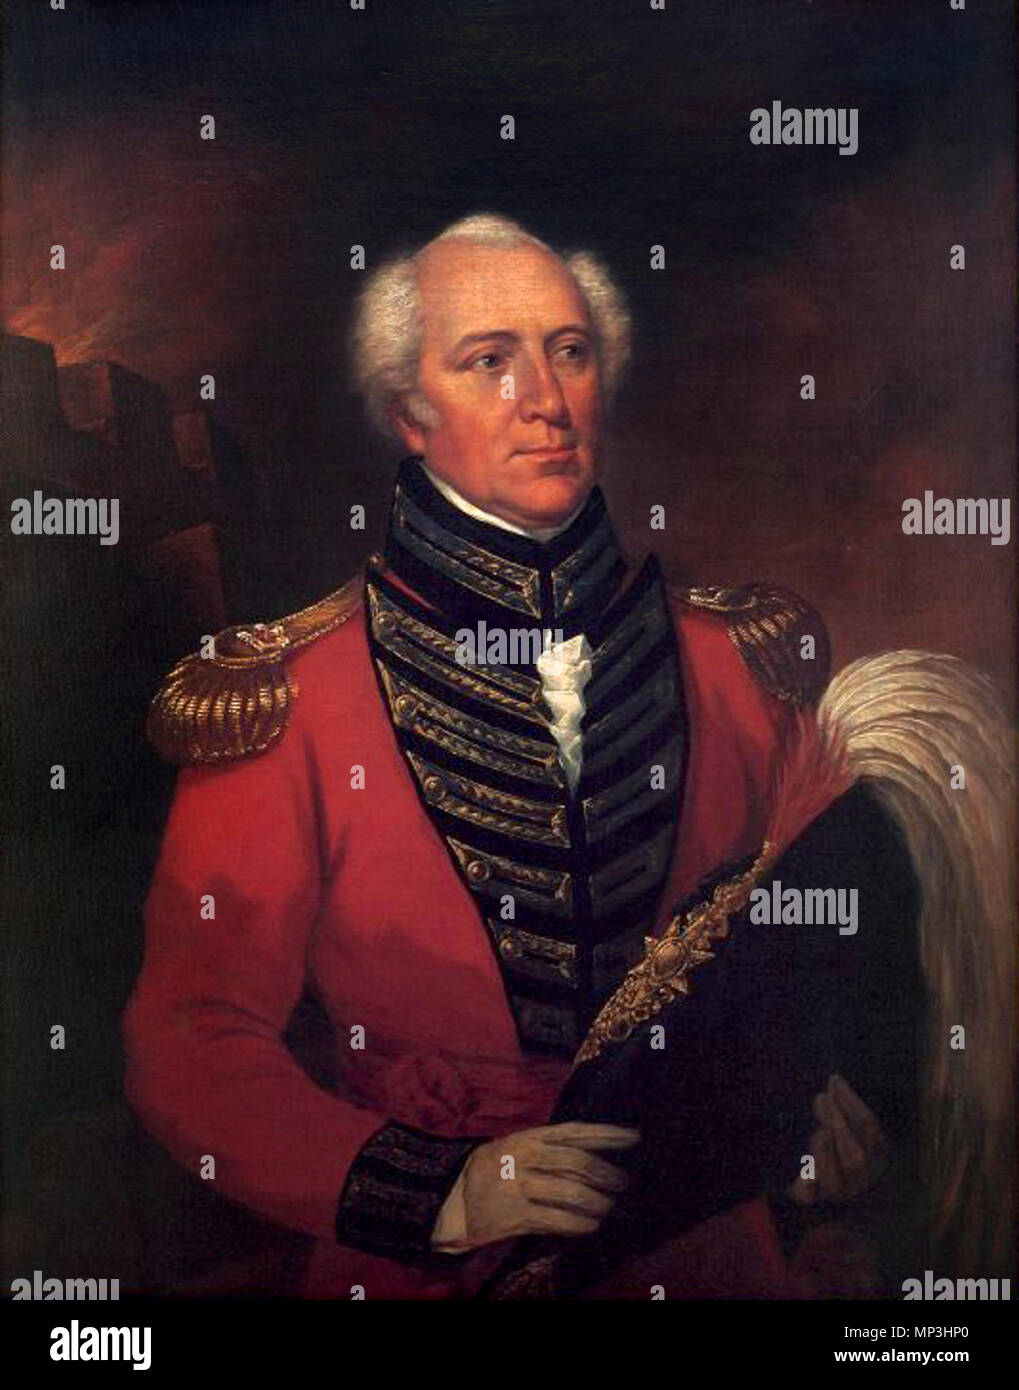 English: Portrait of William Farquhar. .  English: A portrait of Major-General William Farquhar (26 February 1774 – 13 May 1839) of the East India Company, who was the 6th Resident of Malacca and the 1st Resident of colonial Singapore. . circa 1830..   1022 Portrait of William Farquhar (c. 1830) Stock Photo